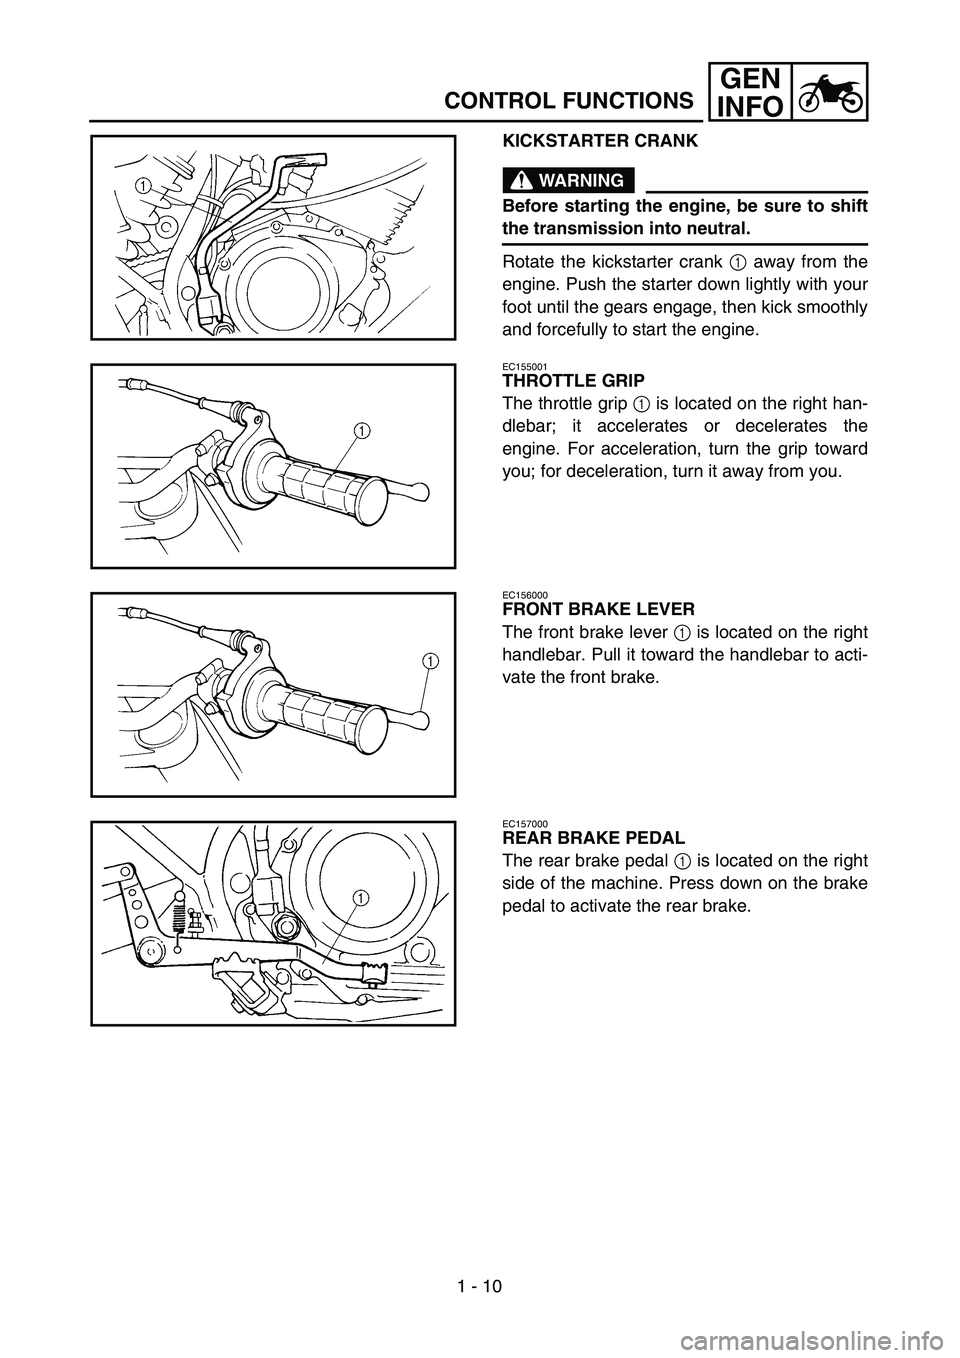 YAMAHA TTR125 2007  Owners Manual 1 - 10
GEN
INFO
CONTROL FUNCTIONS
KICKSTARTER CRANK
WARNING
Before starting the engine, be sure to shift
the transmission into neutral.
Rotate the kickstarter crank 1 away from the
engine. Push the st